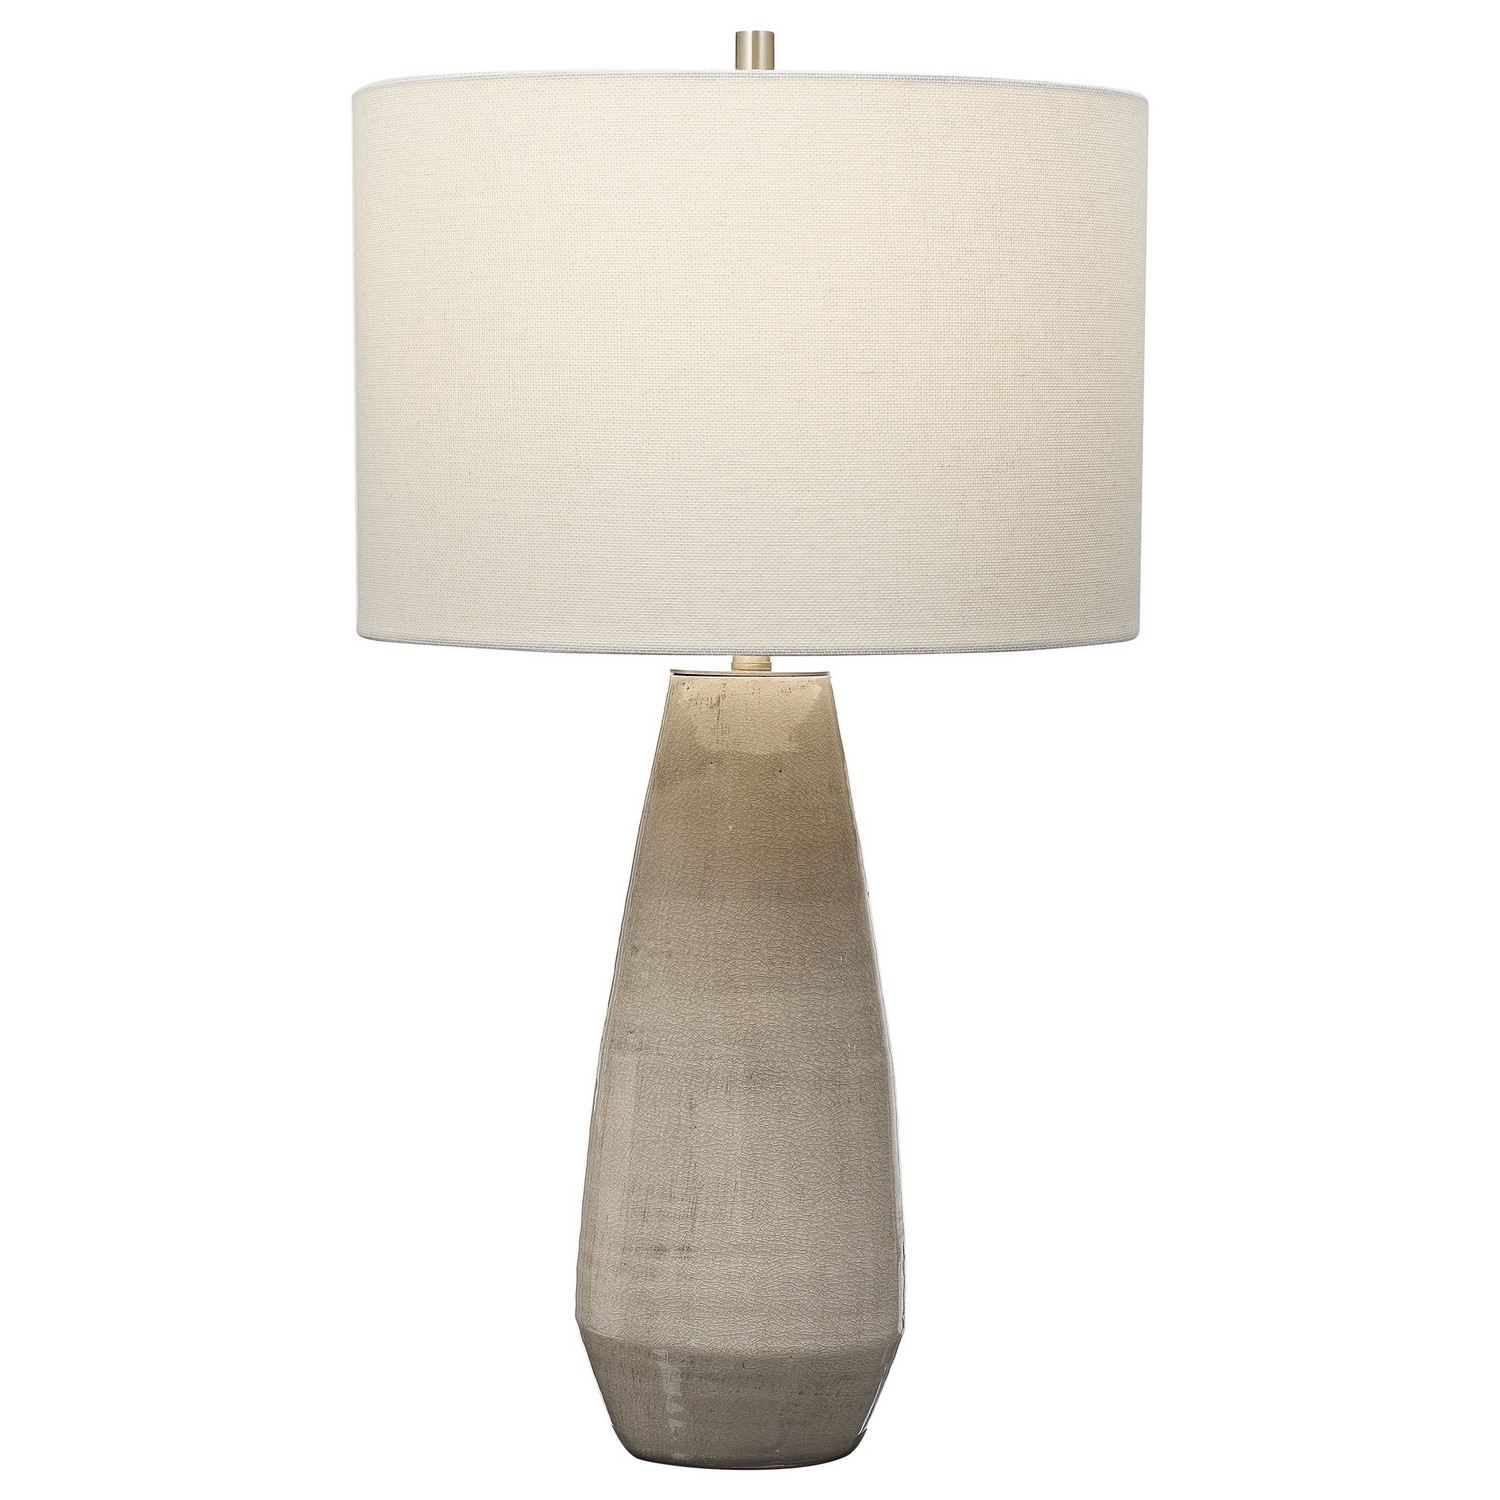 Uttermost Volterra Table Lamp - Taupe/Gray